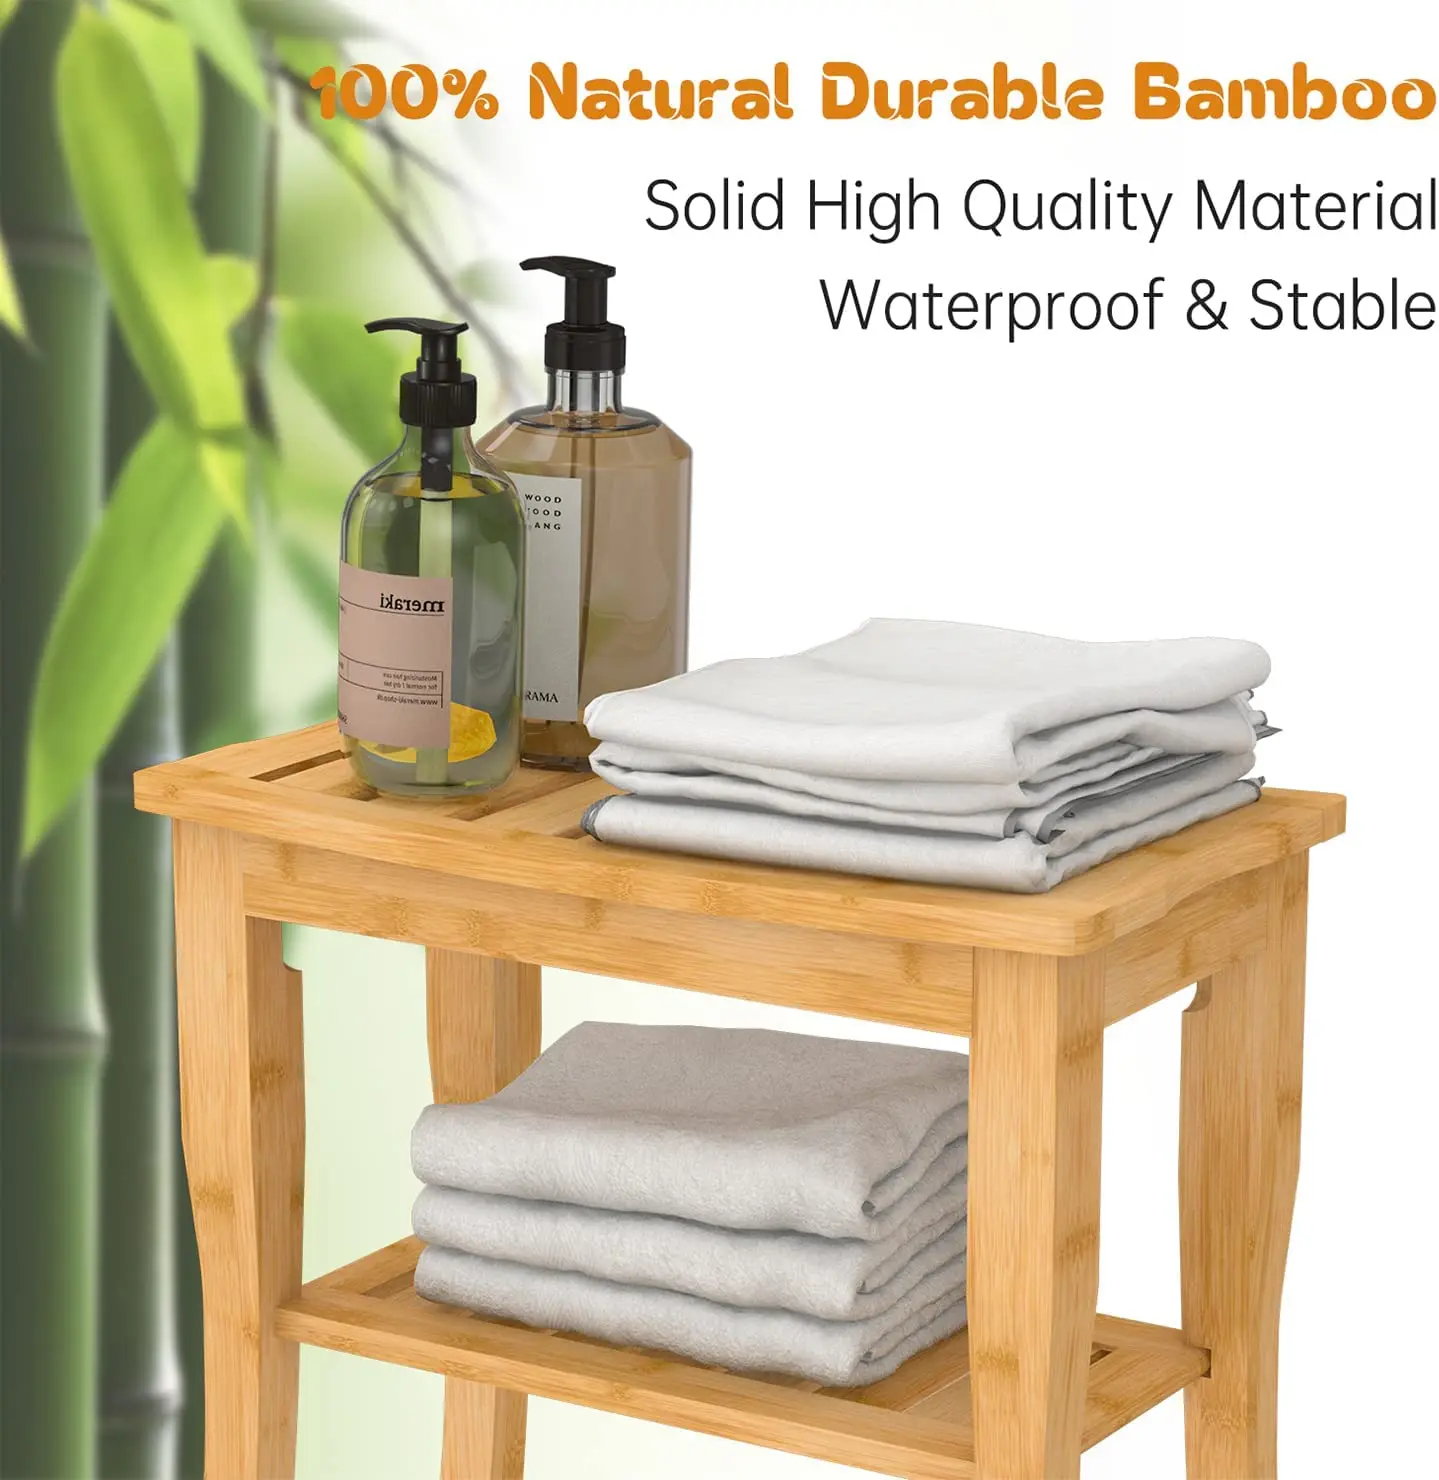 Bamboo Shower Bench Wood Shower Bench with Storage Shelf for Inside Shower